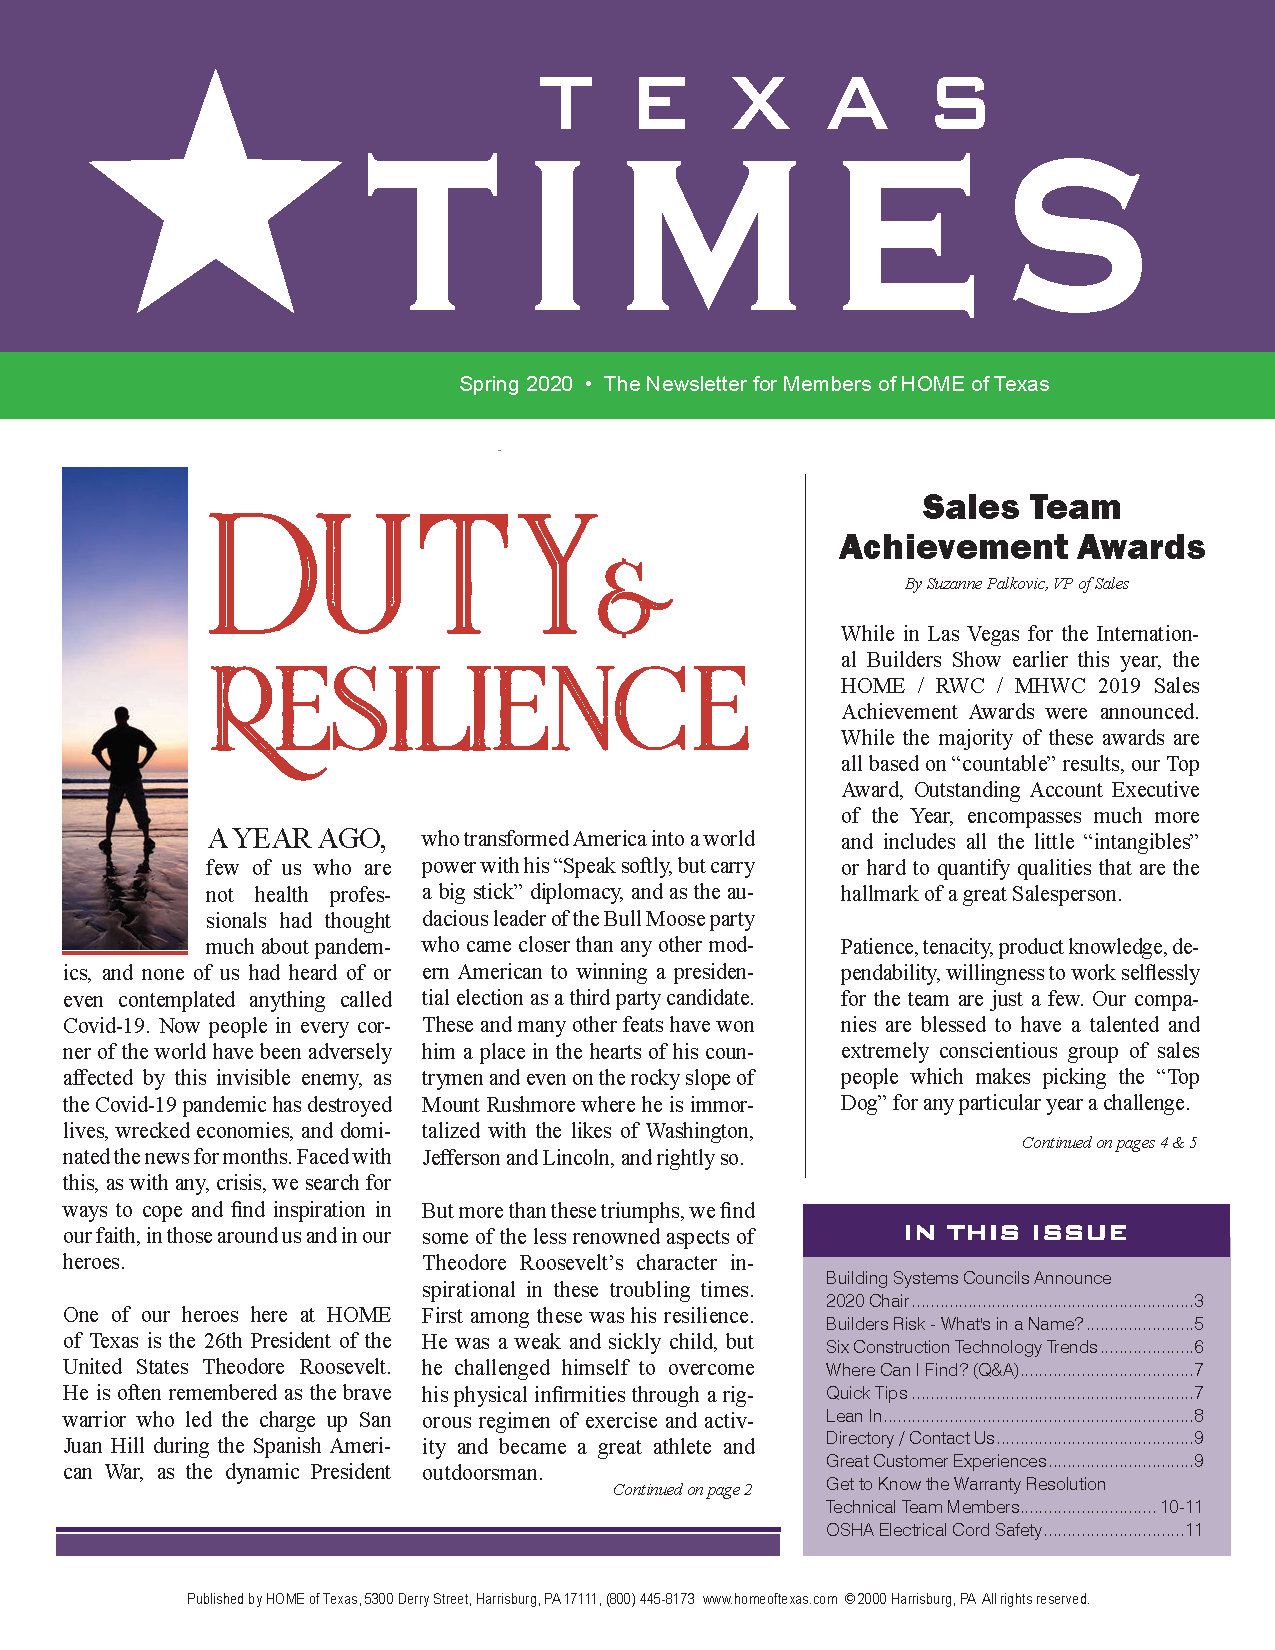 Texas Times Spring 2020 Newsletter